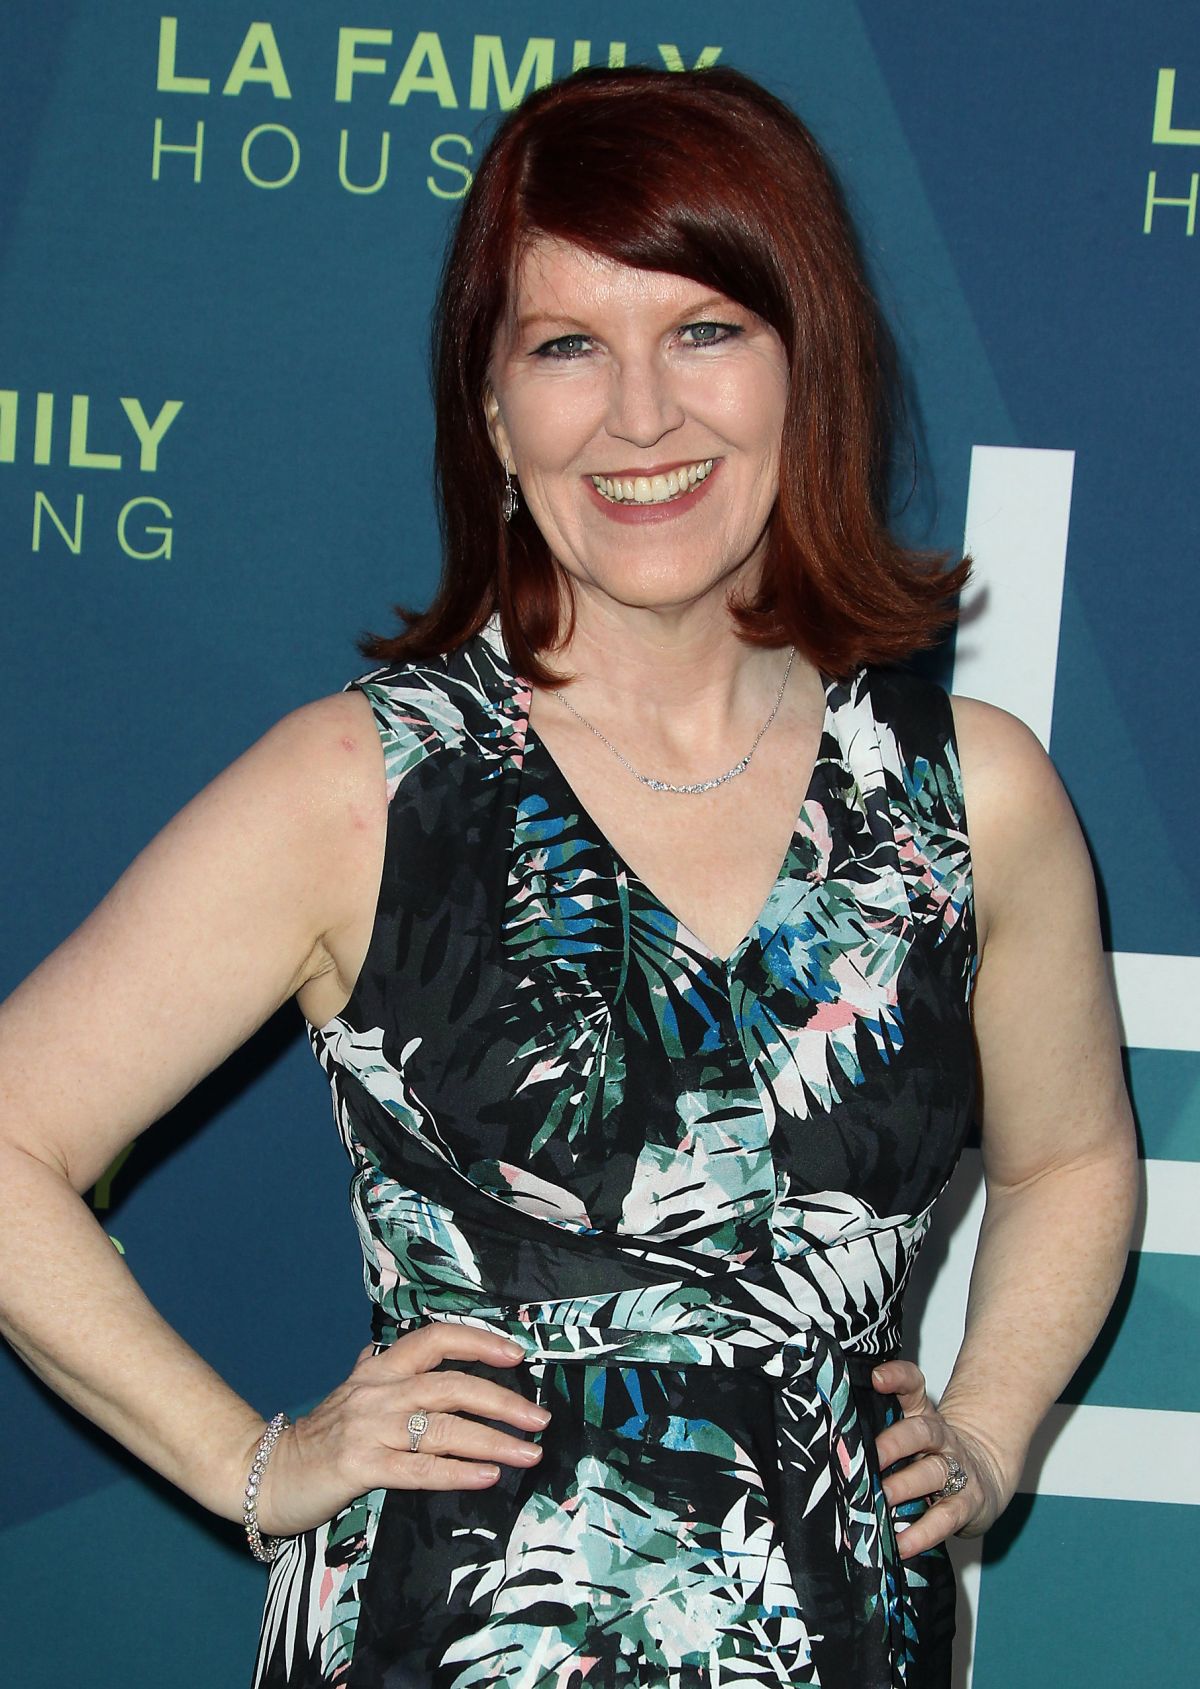 KATE FLANNERY at LA Family Housing Event Awards in Los Angeles 04/05